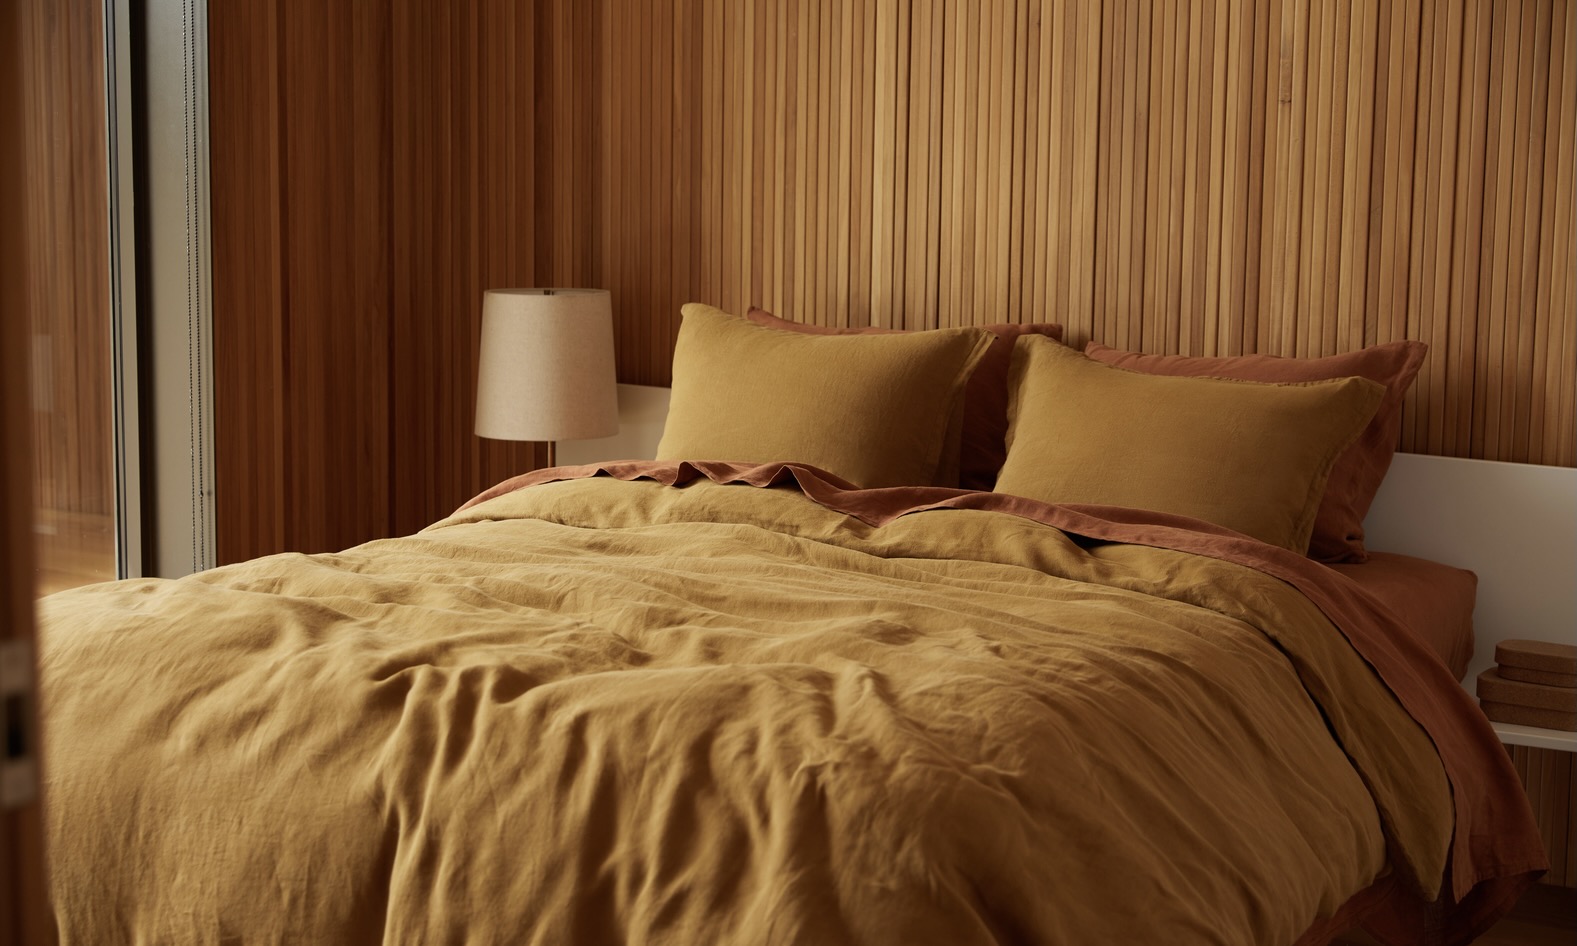 Bed Sheet Color Trends 2022: Which Bed Sheet Colors Are Popular Right Now?  | Parachute Blog